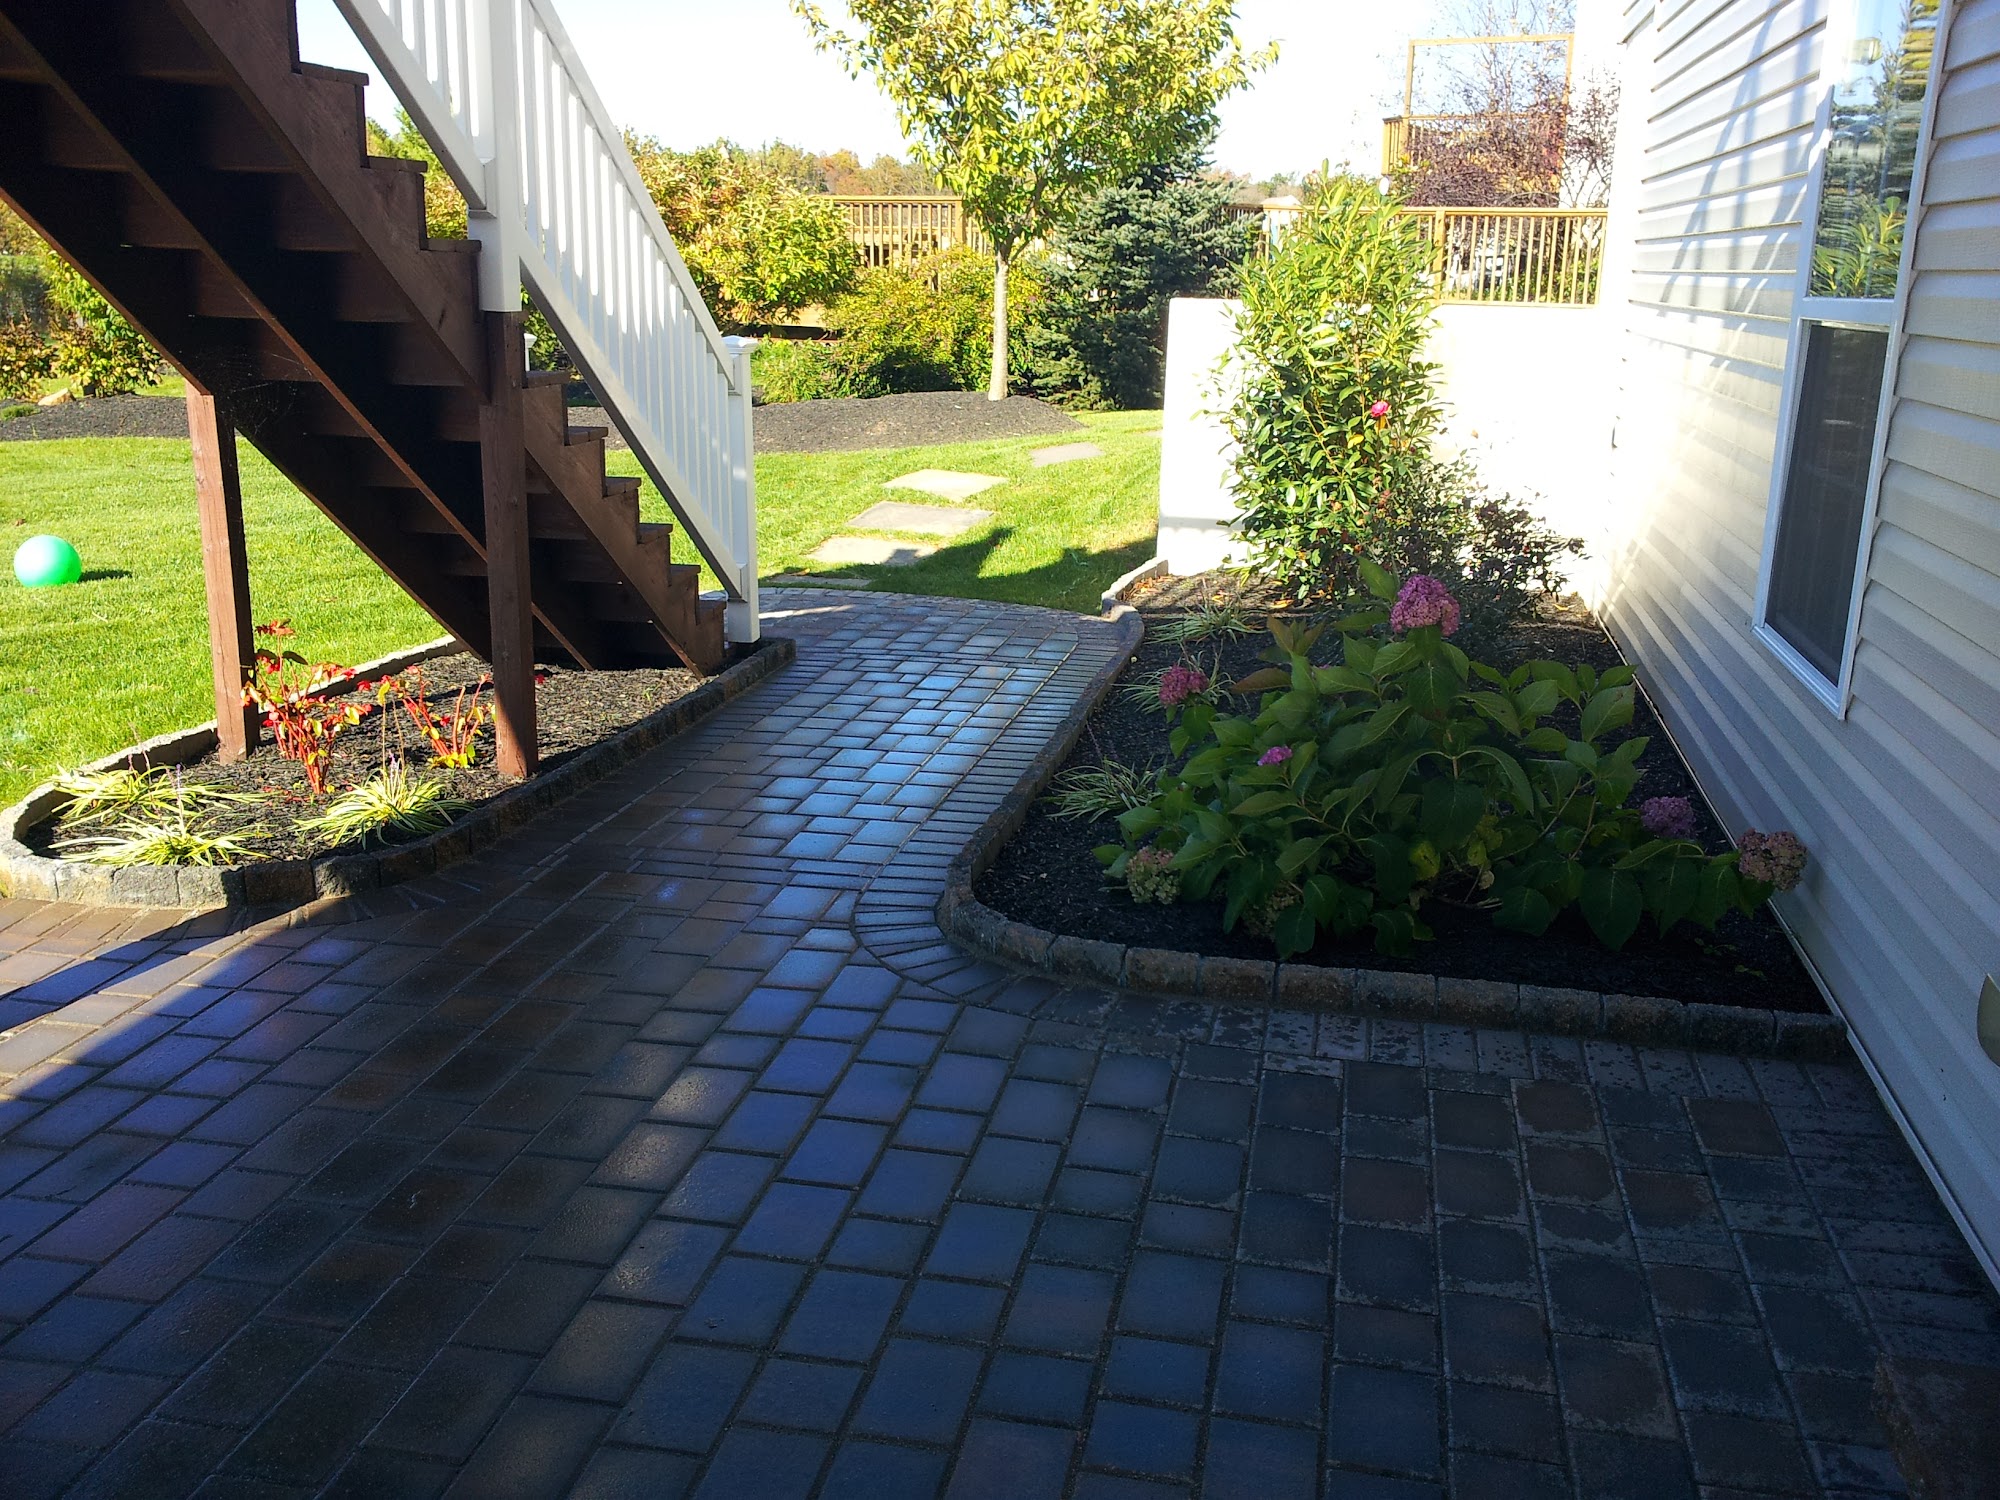 Marvels Landscaping & General Contracting LLC 257 Glendale Rd, Oxford Pennsylvania 19363